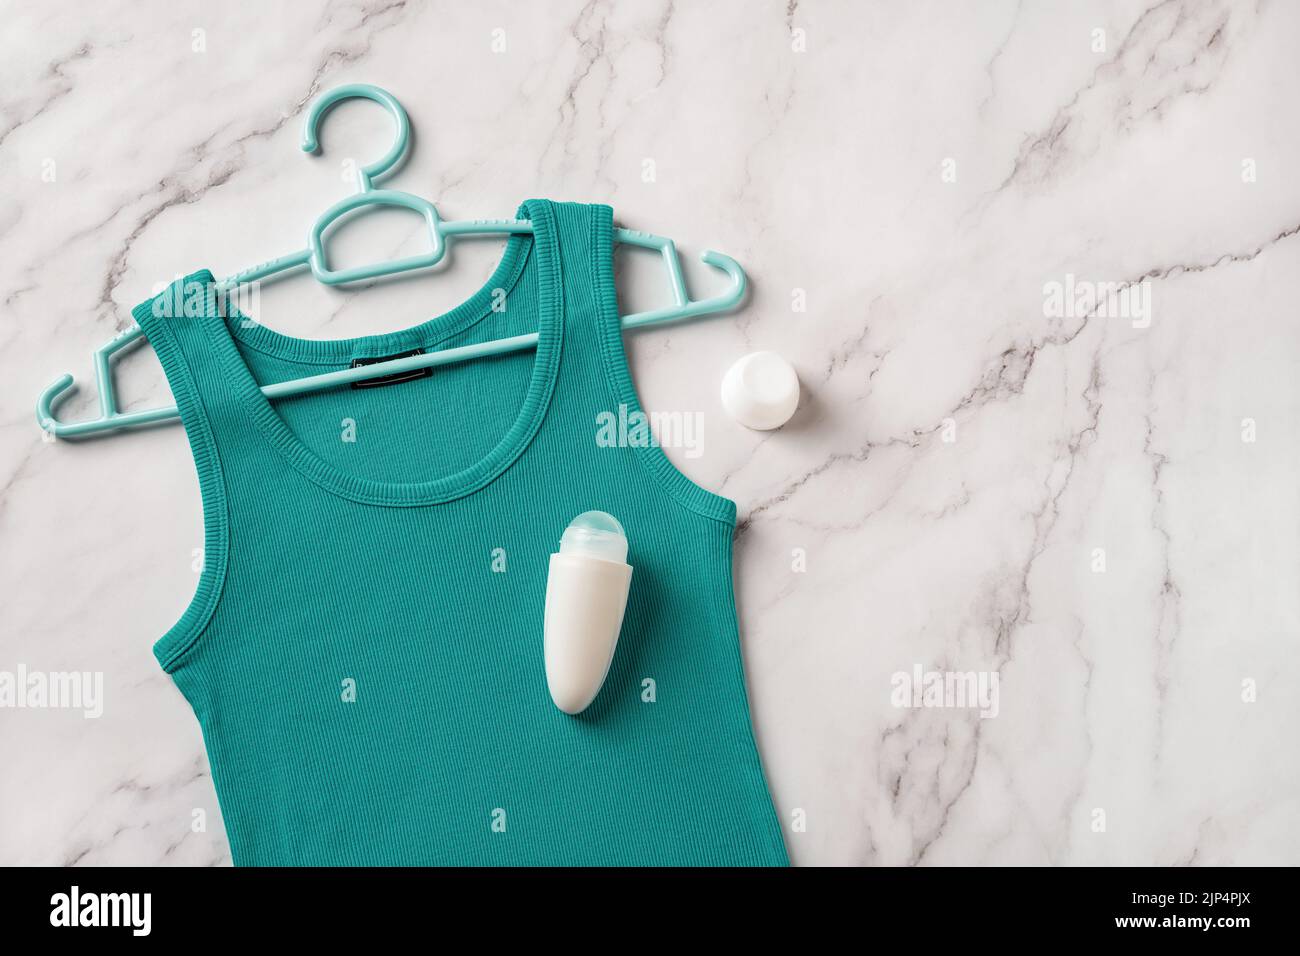 Roll on antiperspirant on a teal tank top over marble background. Linen jersey tank on a hanger and roll-on deodorant to prevent body odour. Hygiene. Stock Photo